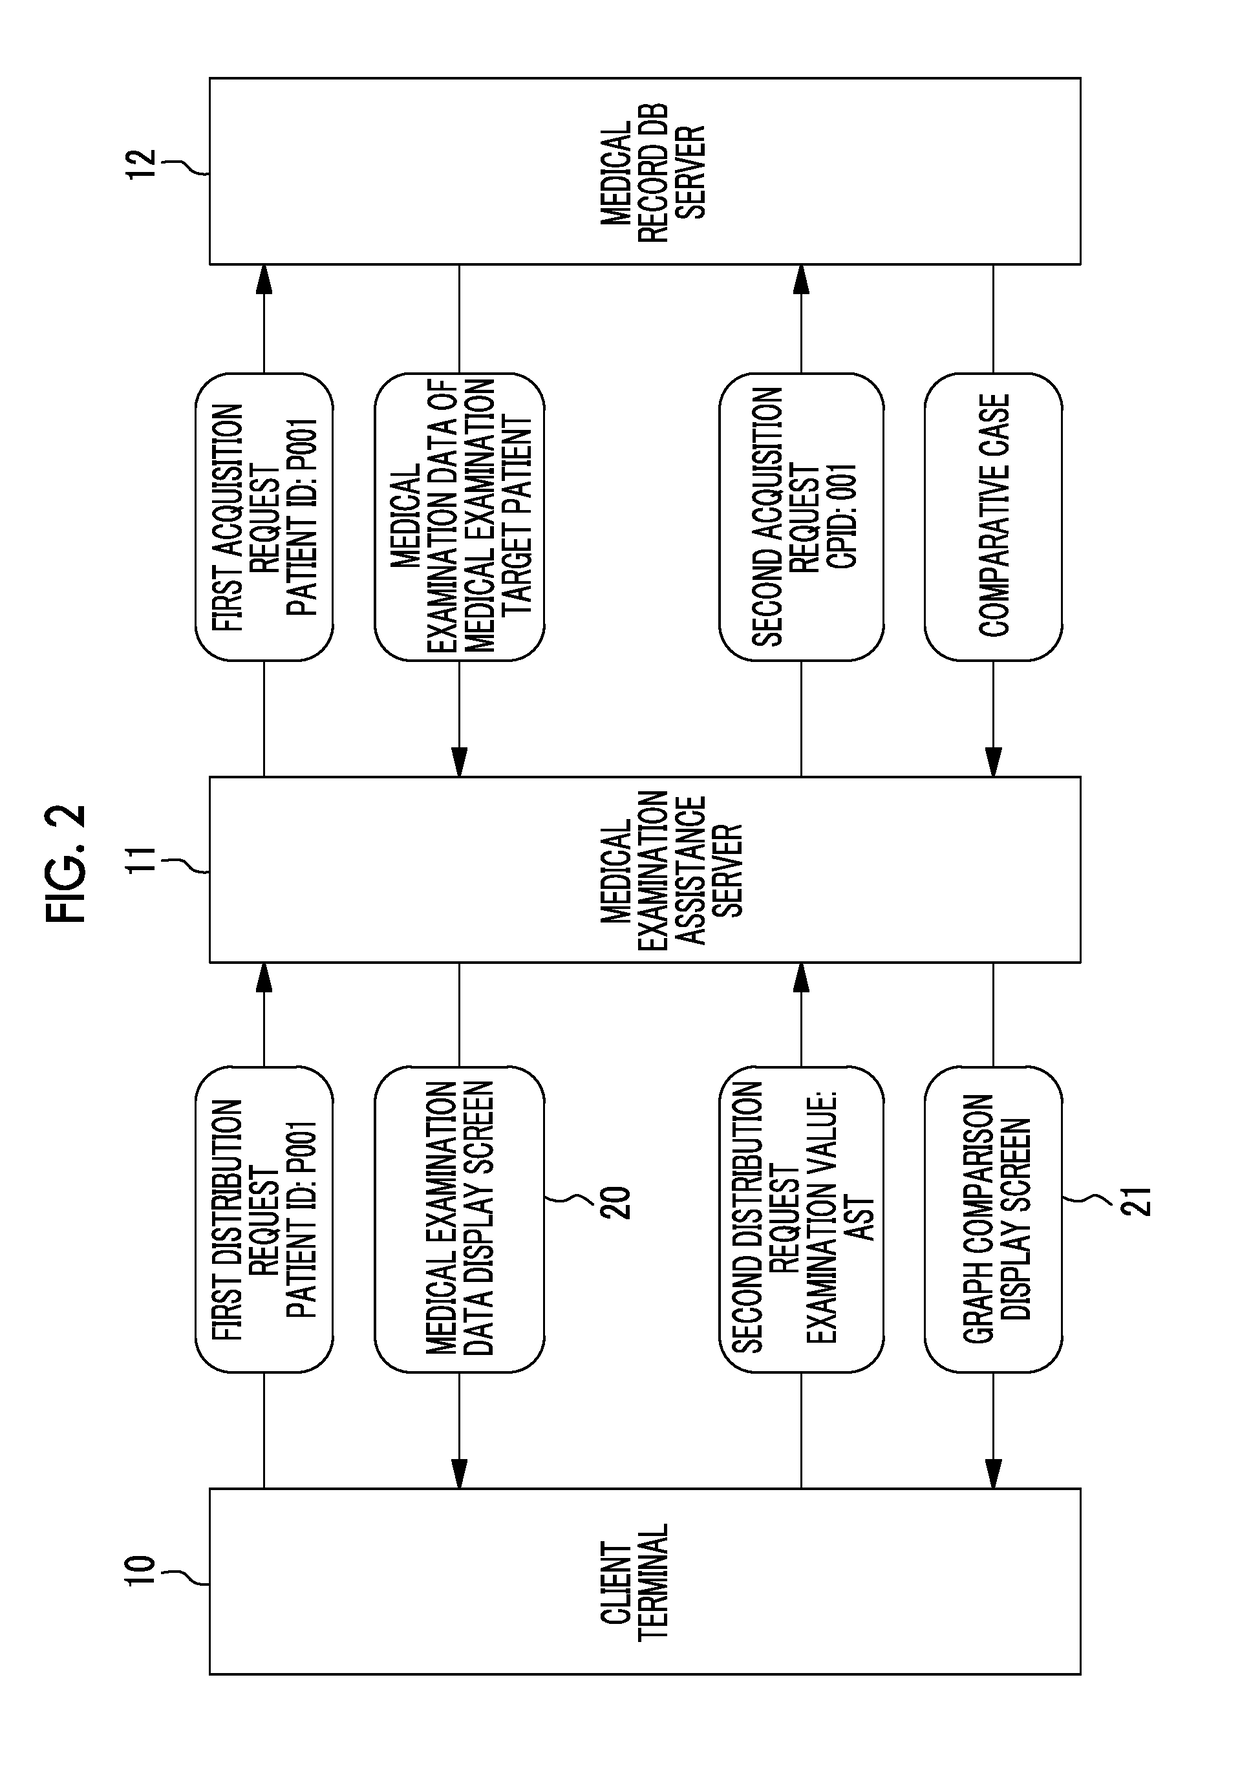 Medical examination assistance apparatus, operation method and operation program thereof, and medical examination assistance system